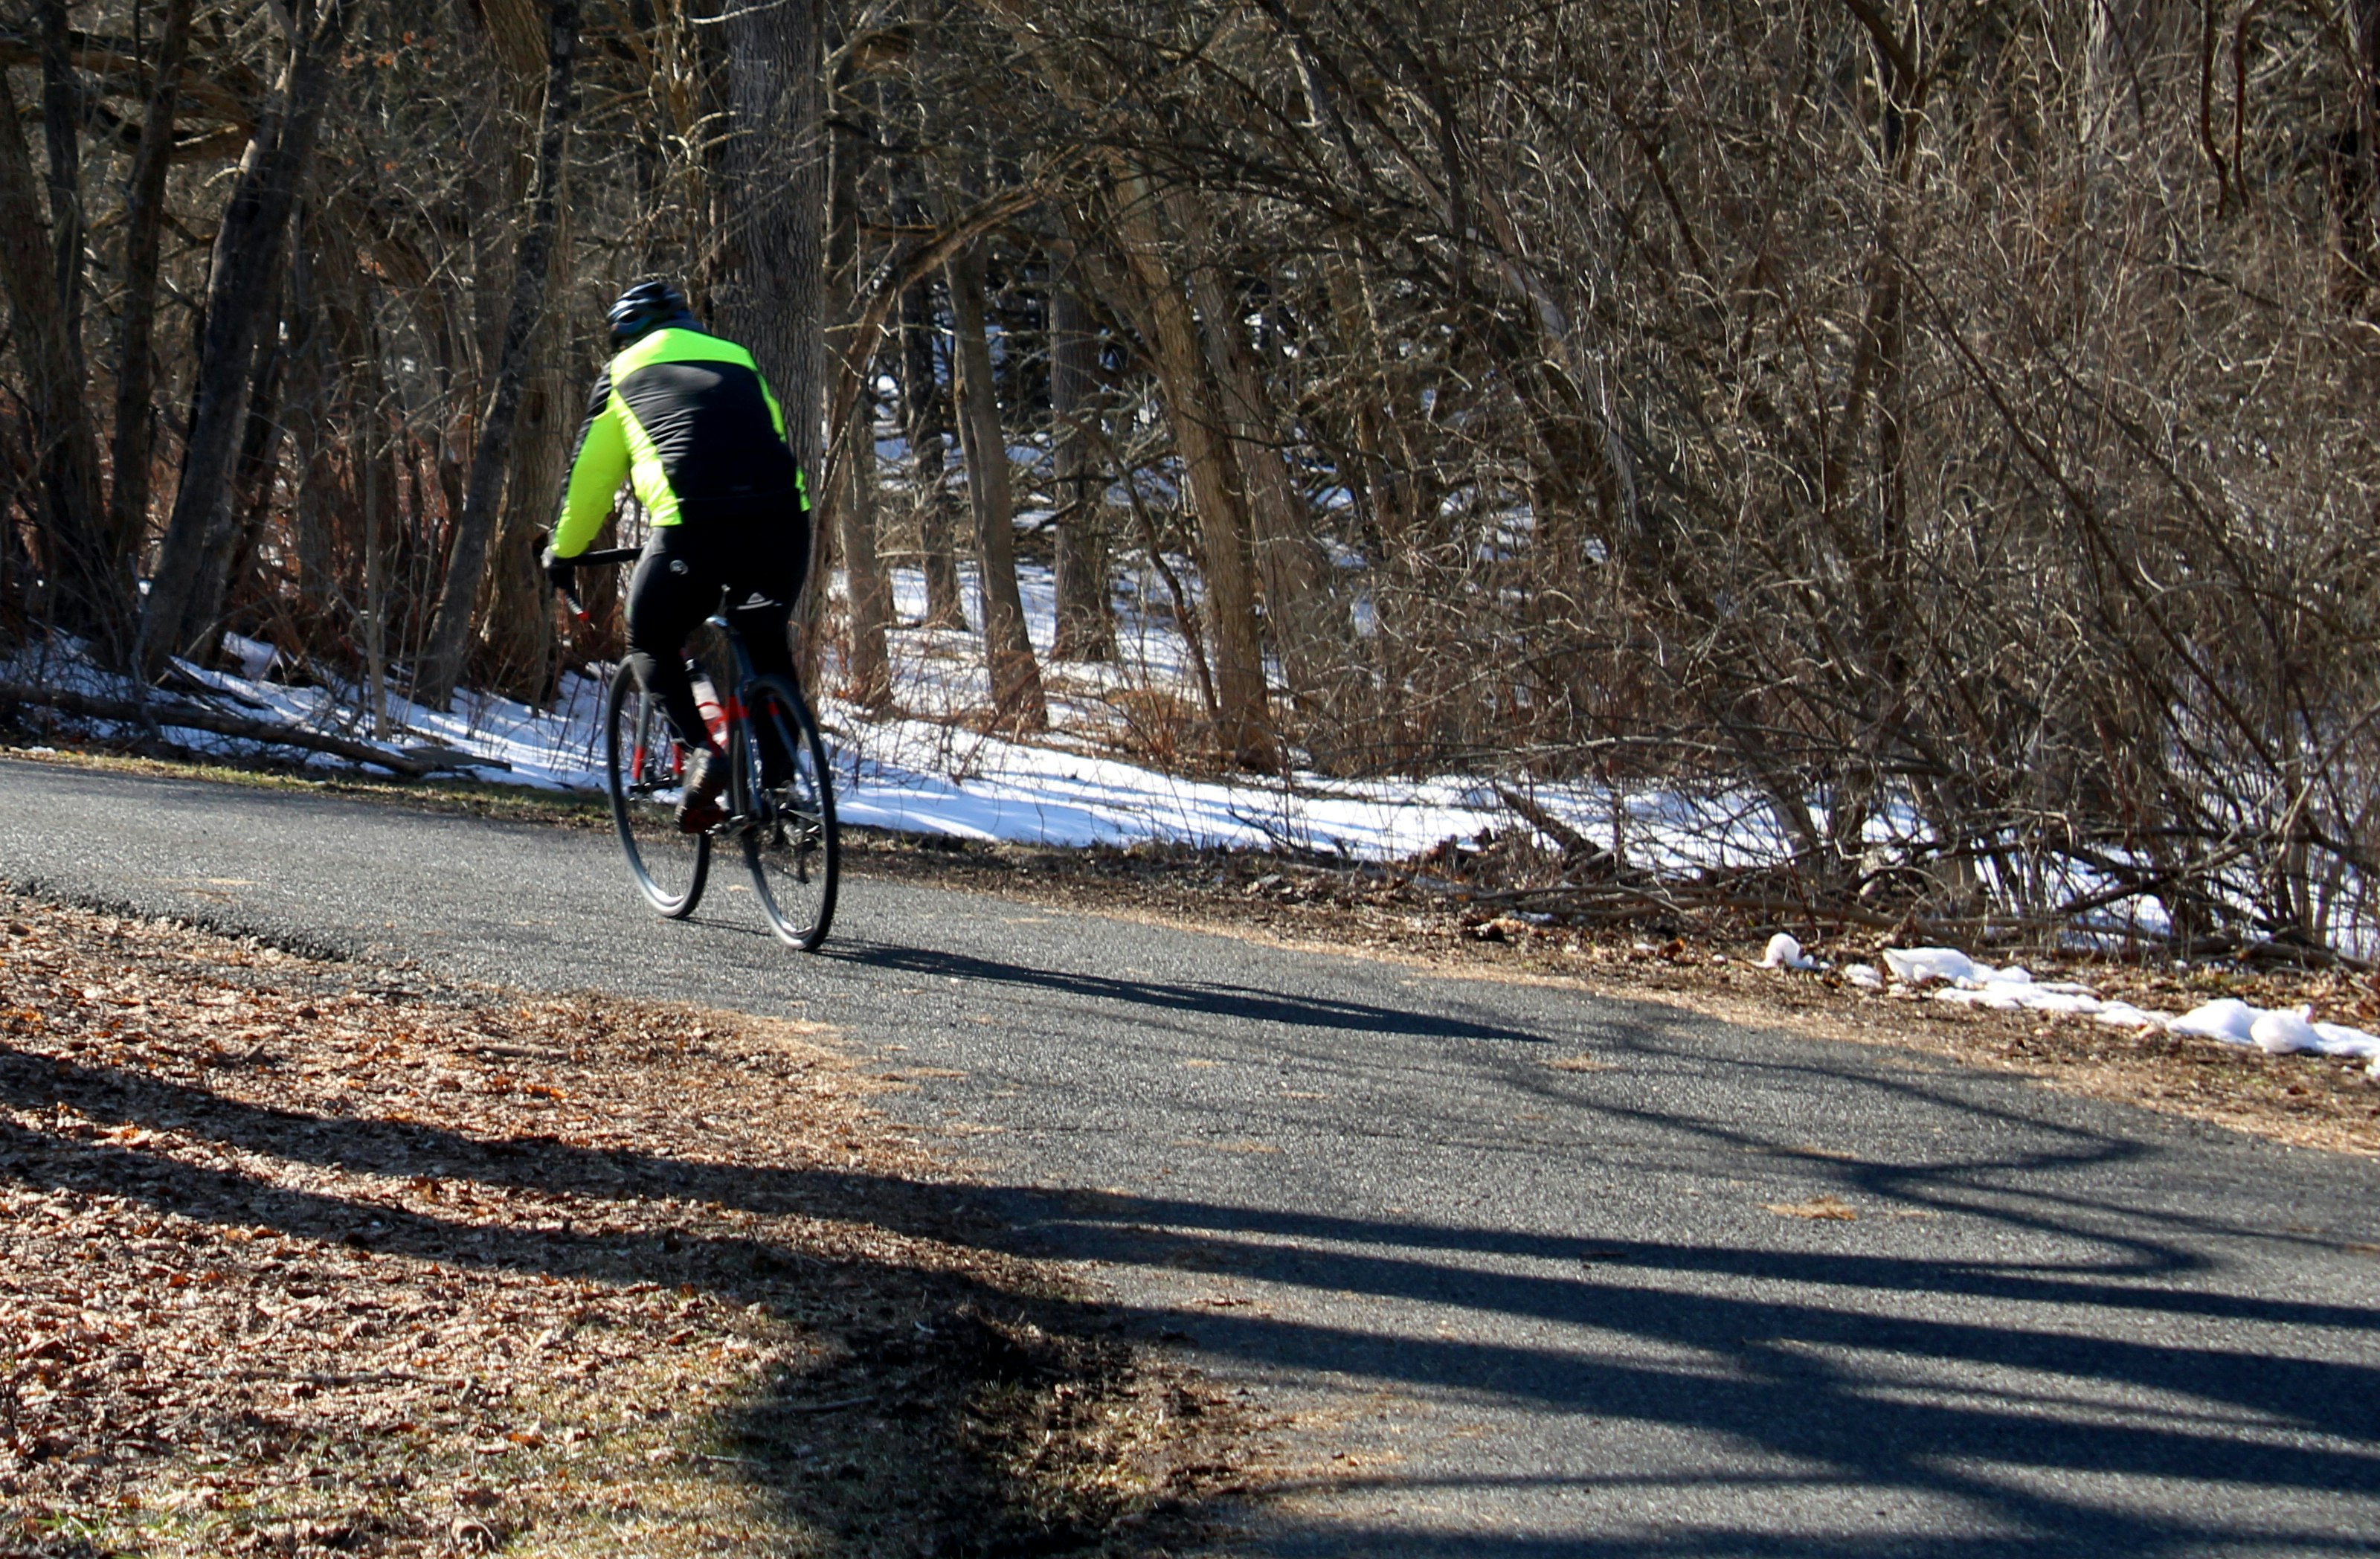 A speeding bicyclist, his legs pumping furiously as he rounds a paved trail curve March 3, 2021, at Evansburg State Park in Collegeville PA, is suited for the day's warmer-then-usual spring-like weather.